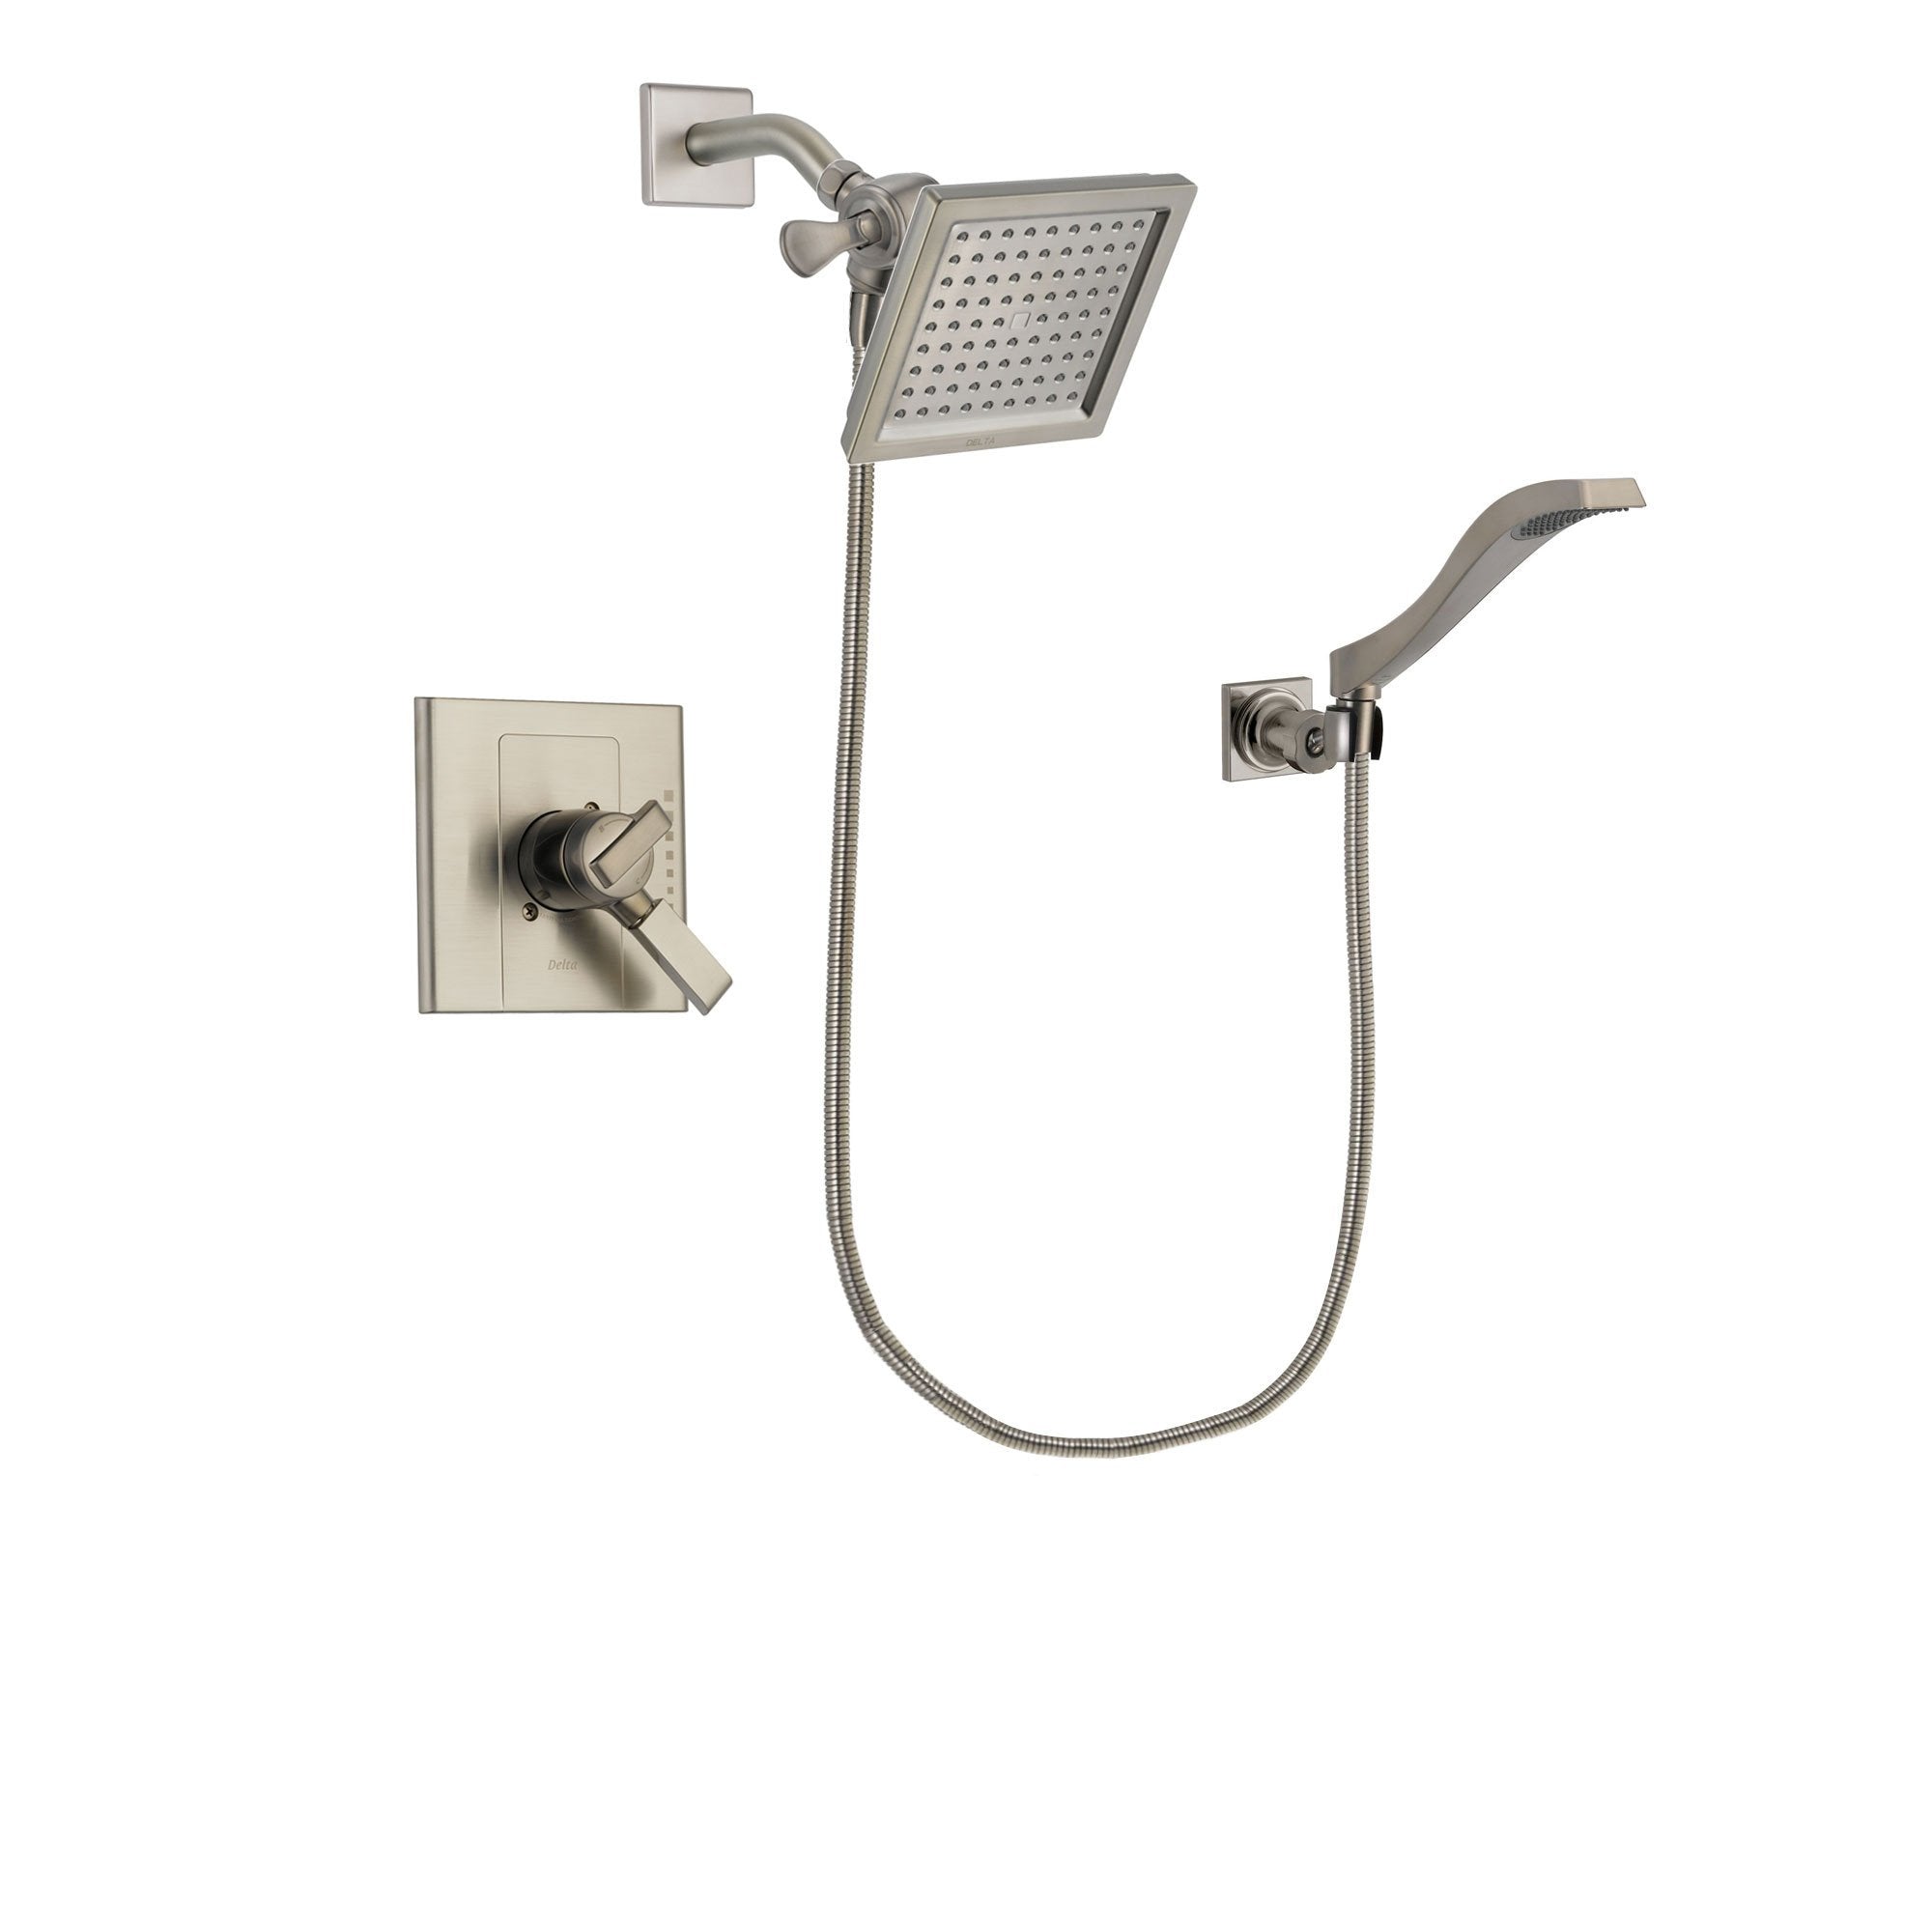 Delta Arzo Stainless Steel Finish Dual Control Shower Faucet System Package with 6.5-inch Square Rain Showerhead and Modern Wall Mount Handheld Shower Spray Includes Rough-in Valve DSP2092V